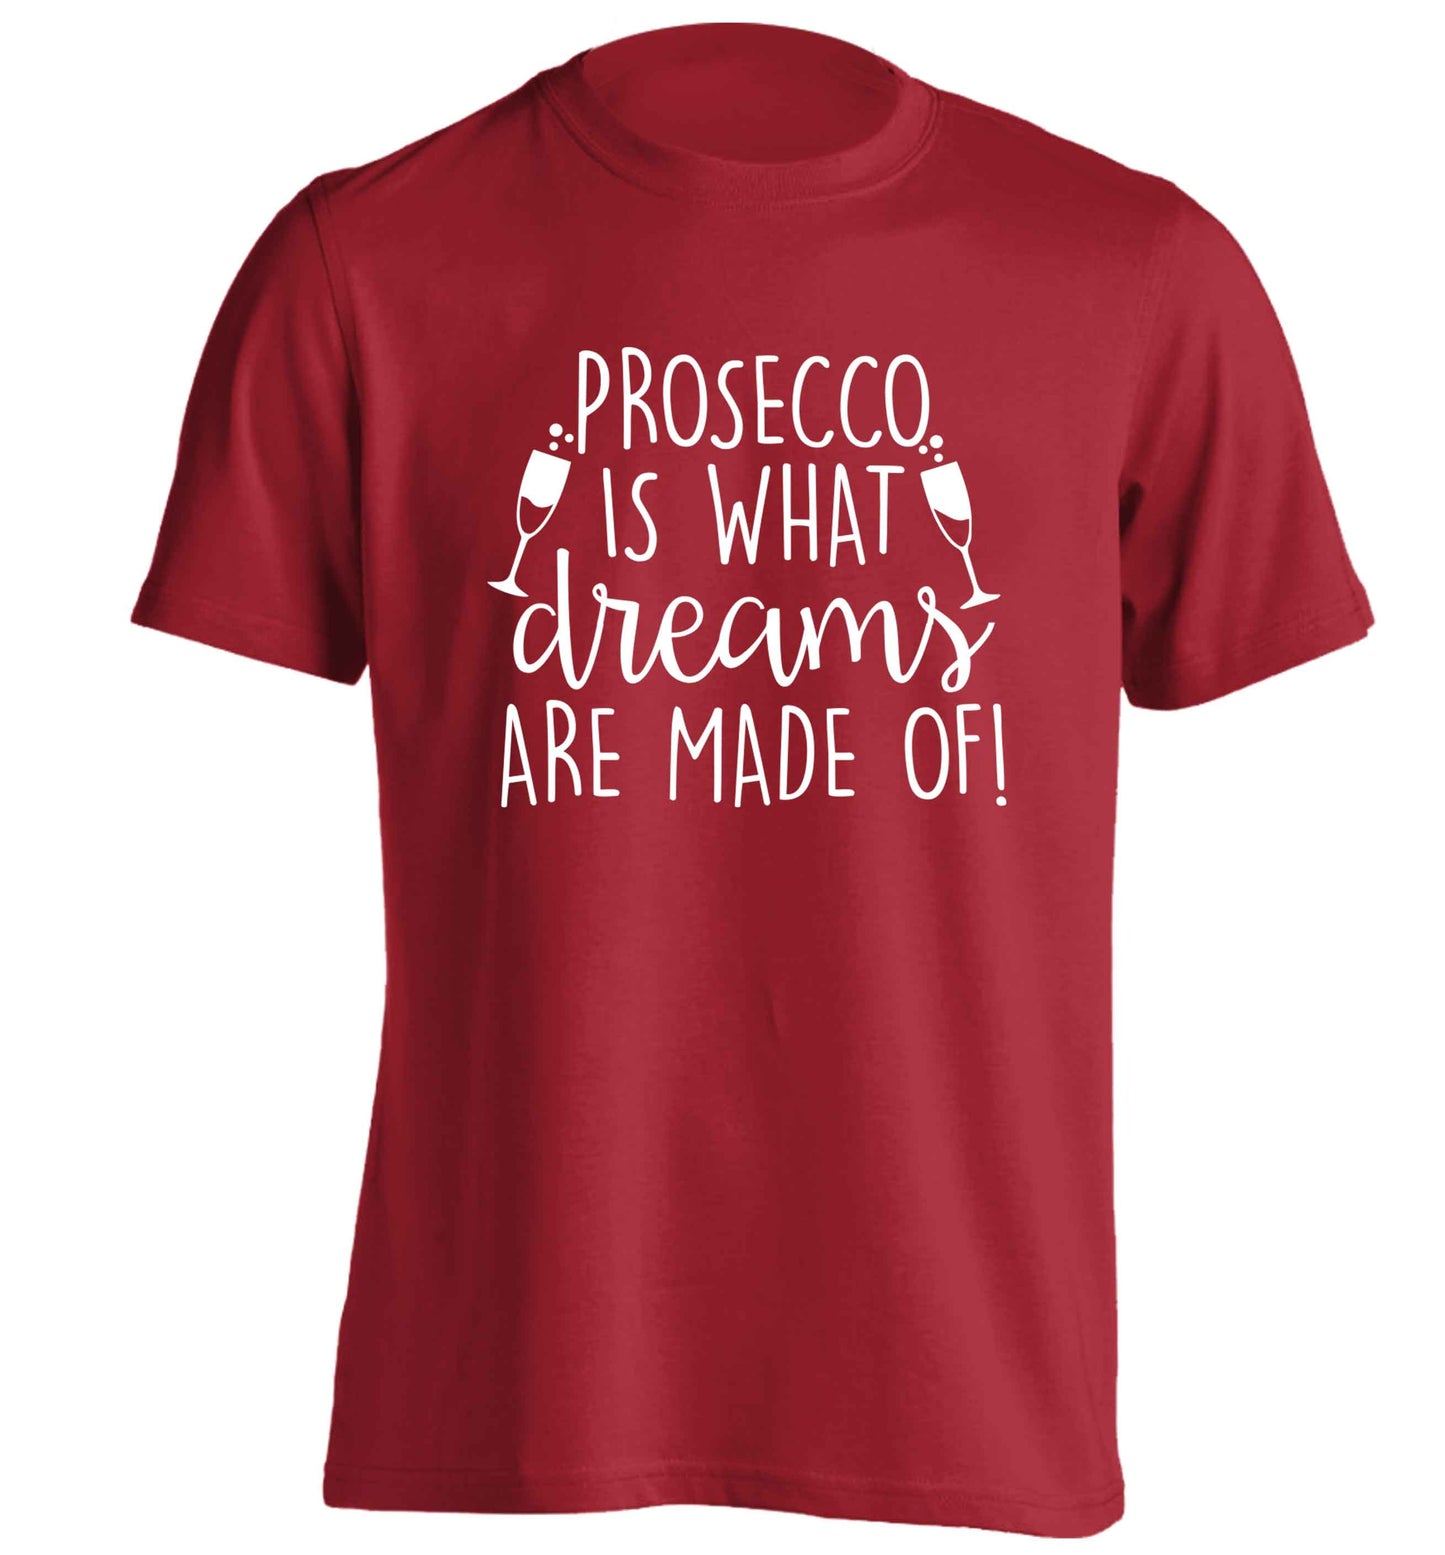 Prosecco is what dreams are made of adults unisex red Tshirt 2XL